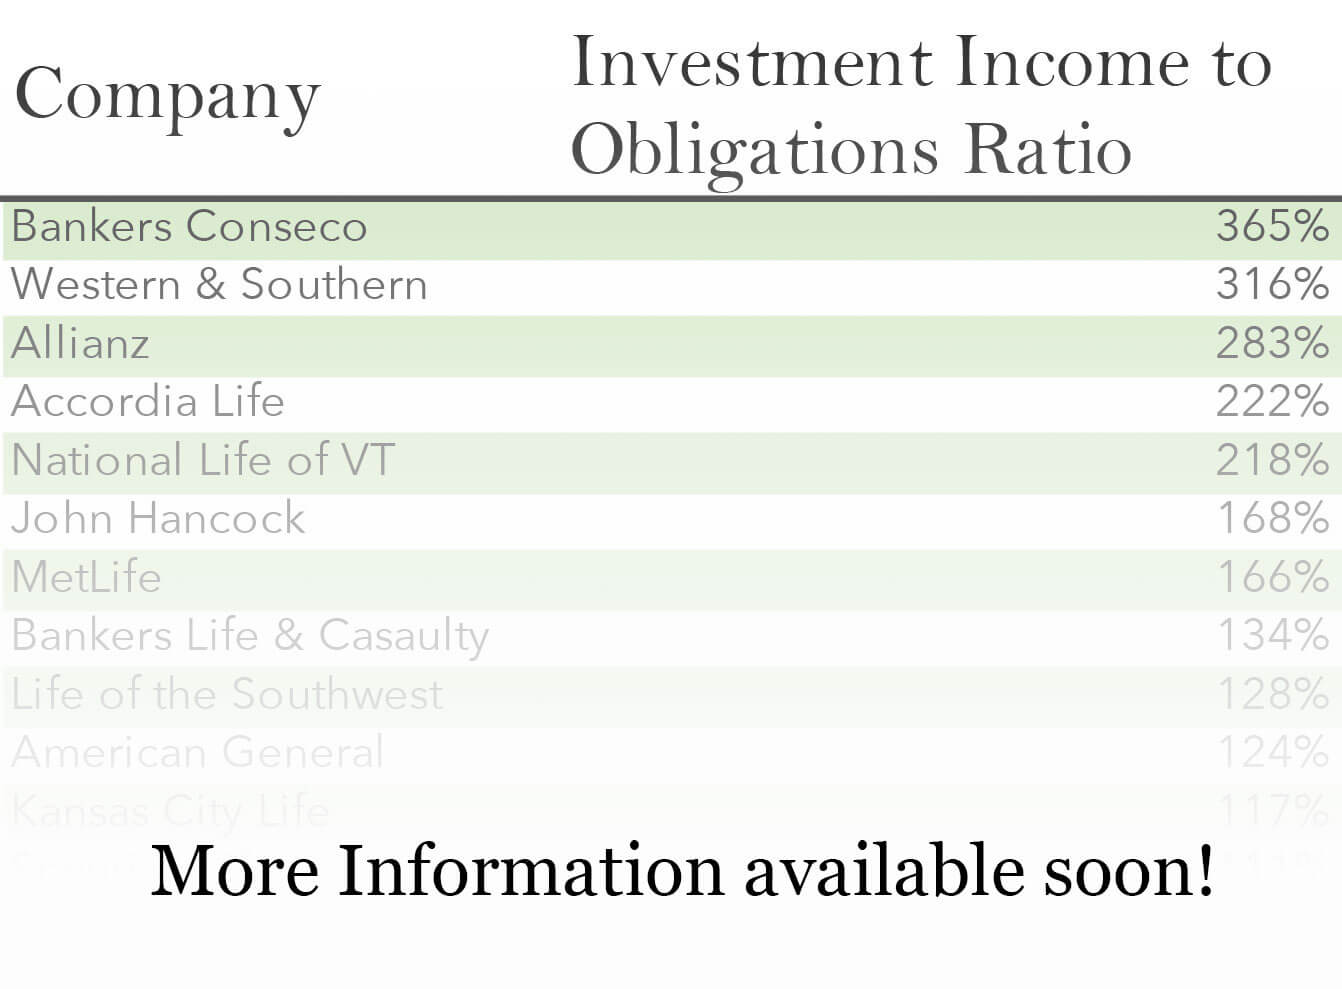 Income to Obligation Ratio 2018